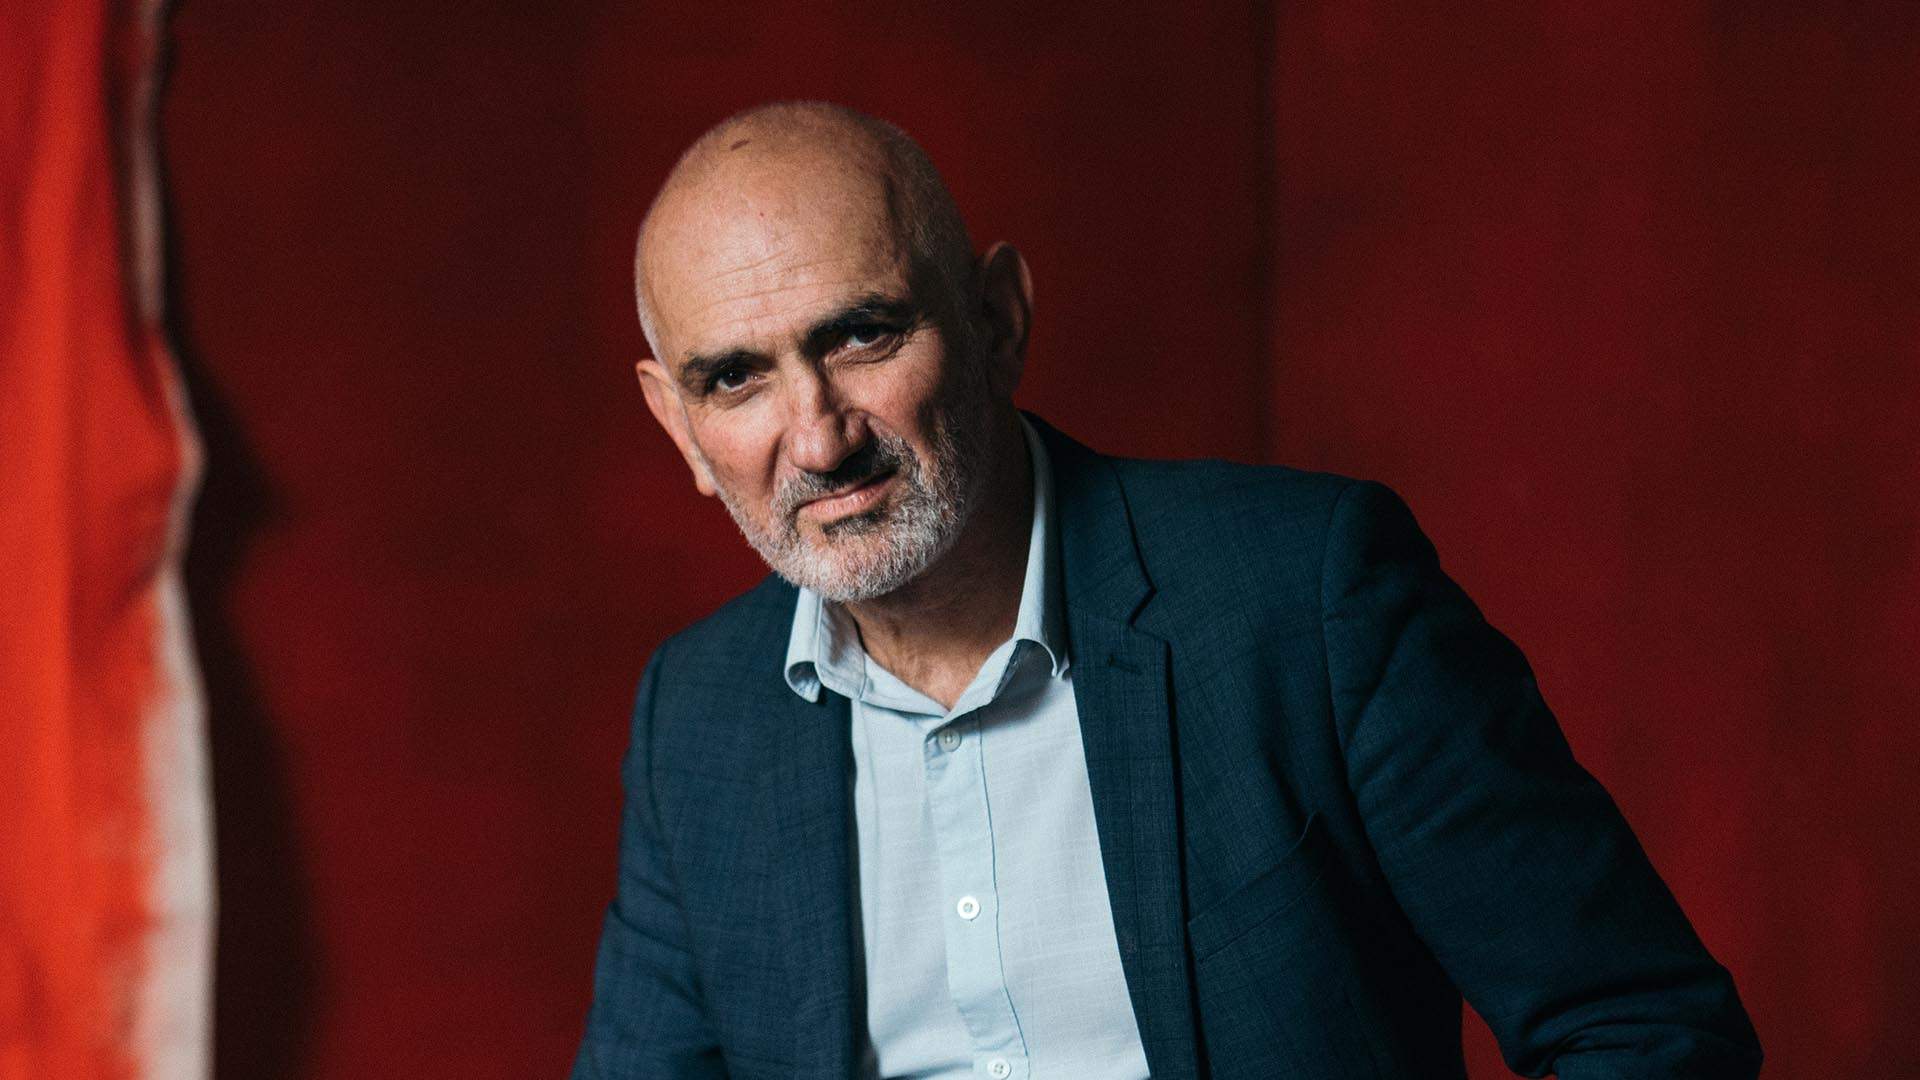 Paul Kelly Is Bringing Back His 'Making Gravy' Tour for a Fourth Year